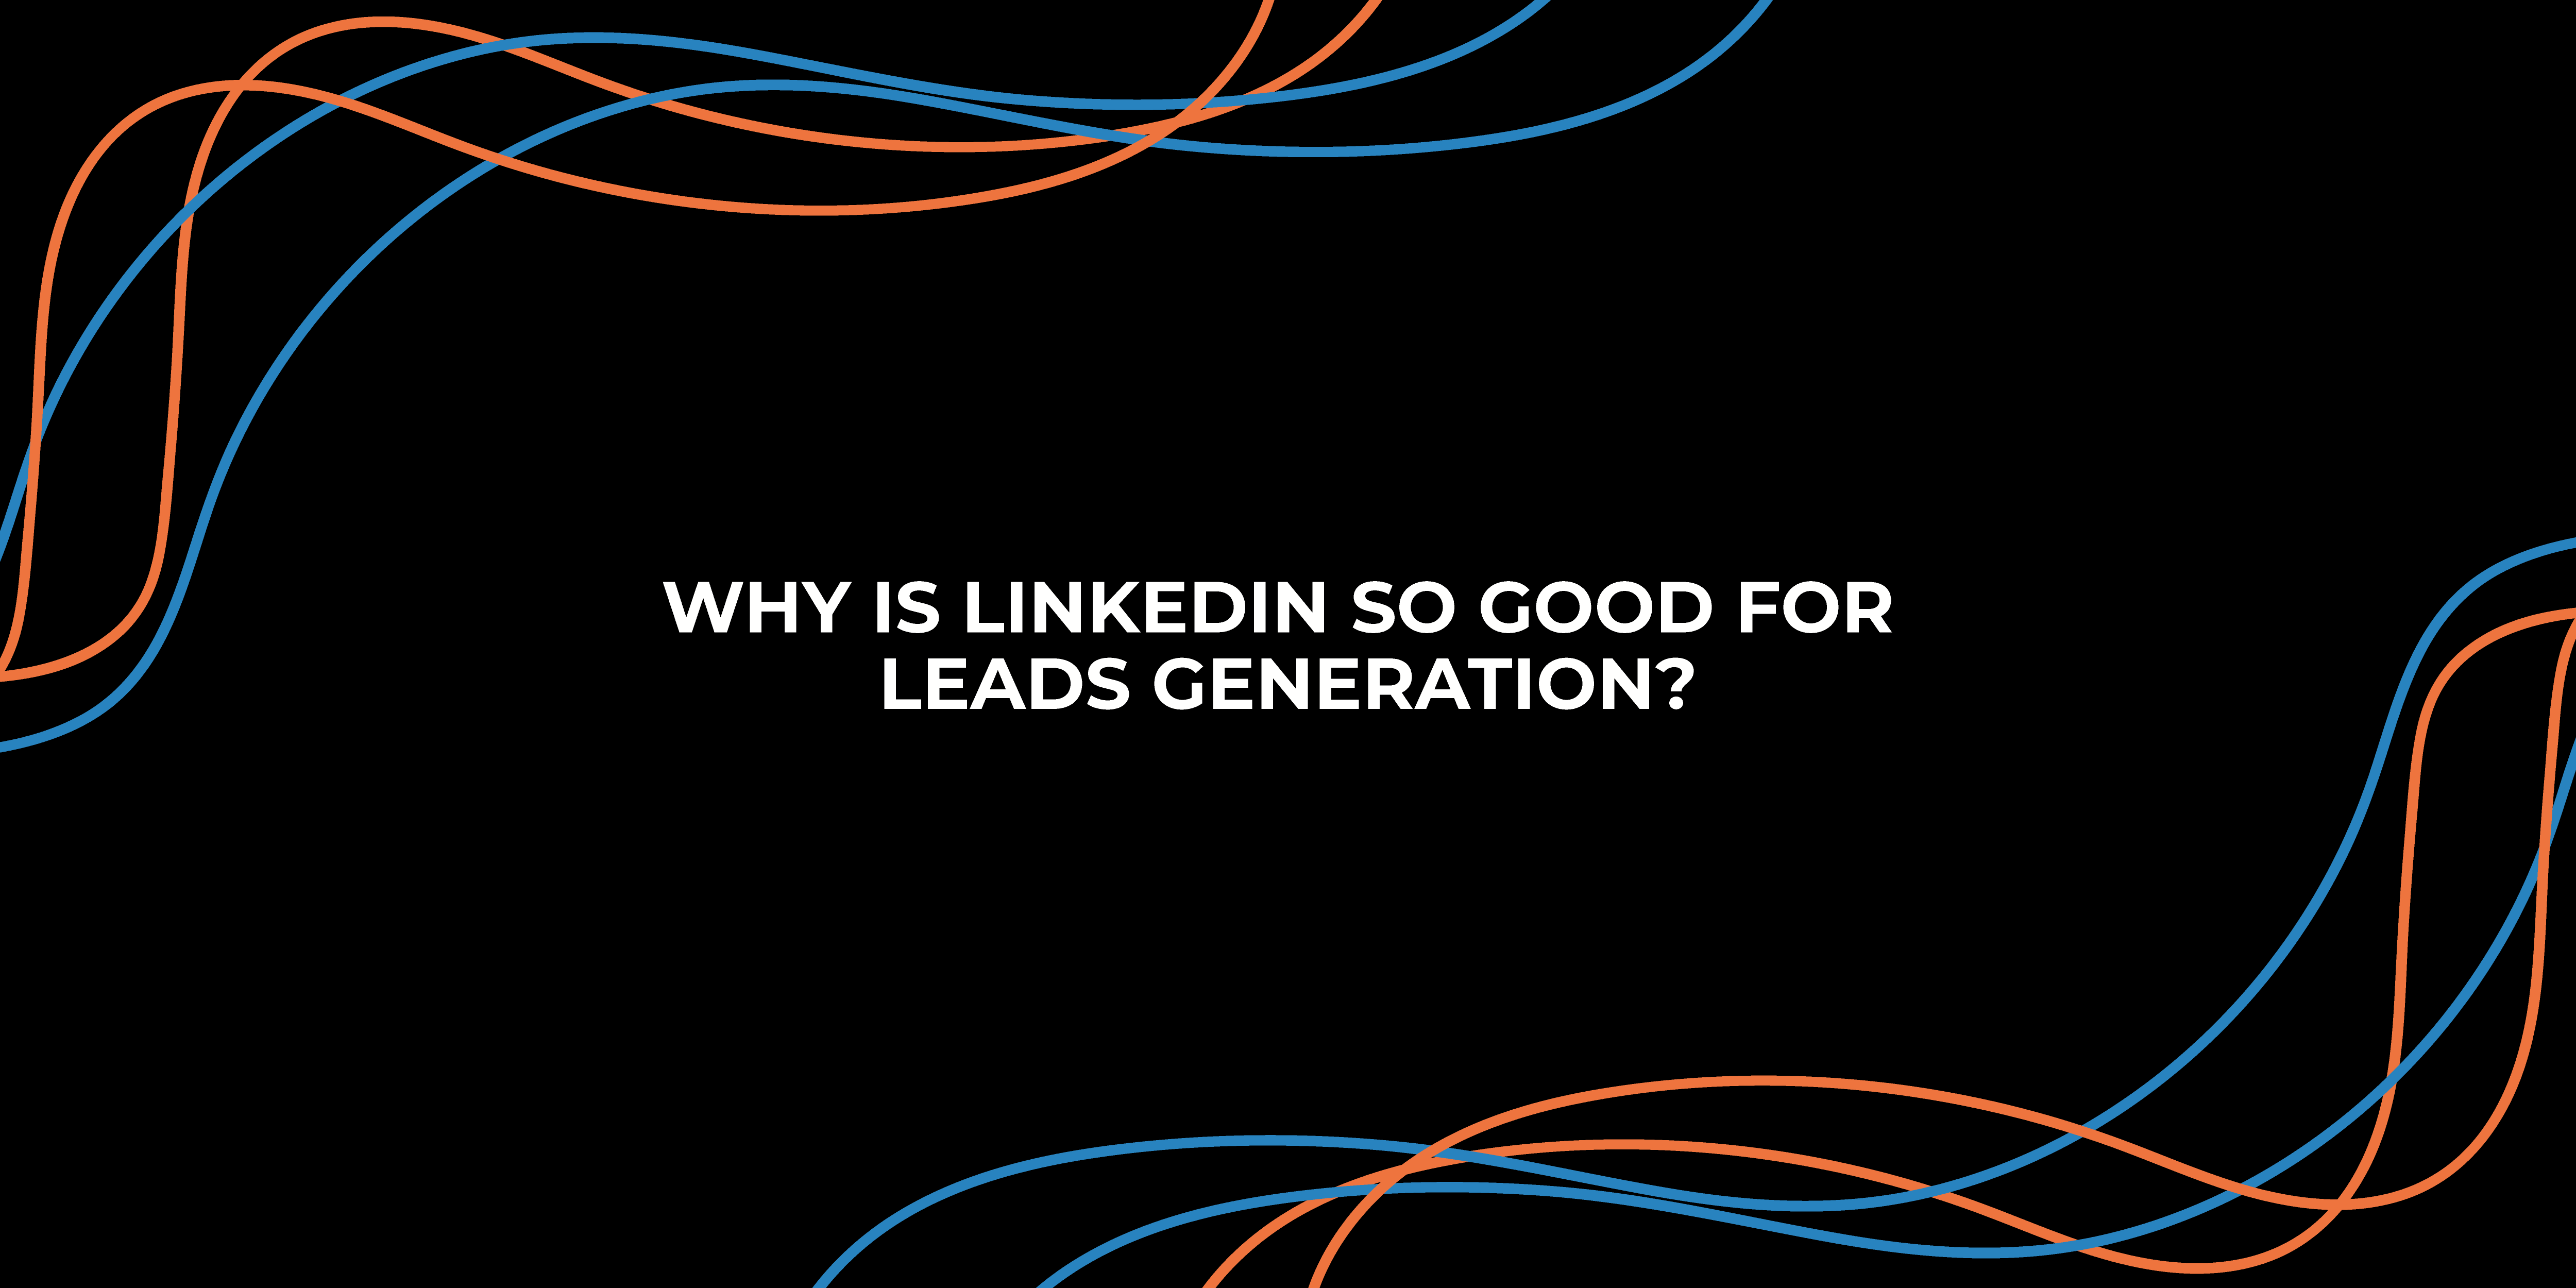 Why is LinkedIn so good for lead generation?